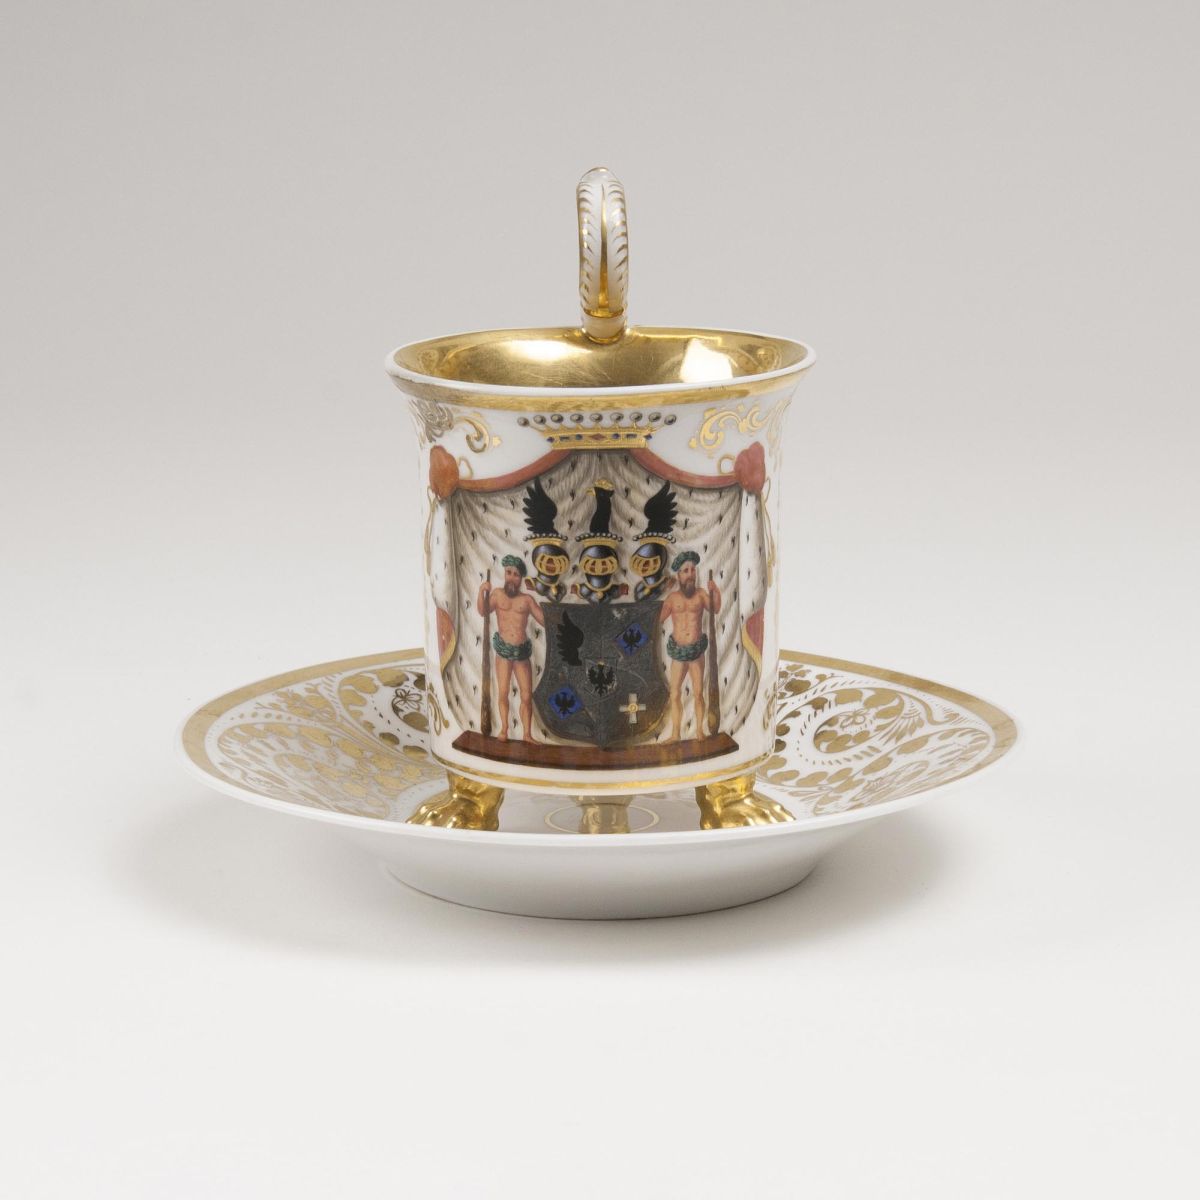 A Berlin Cup with Elaborate Coat of Arms